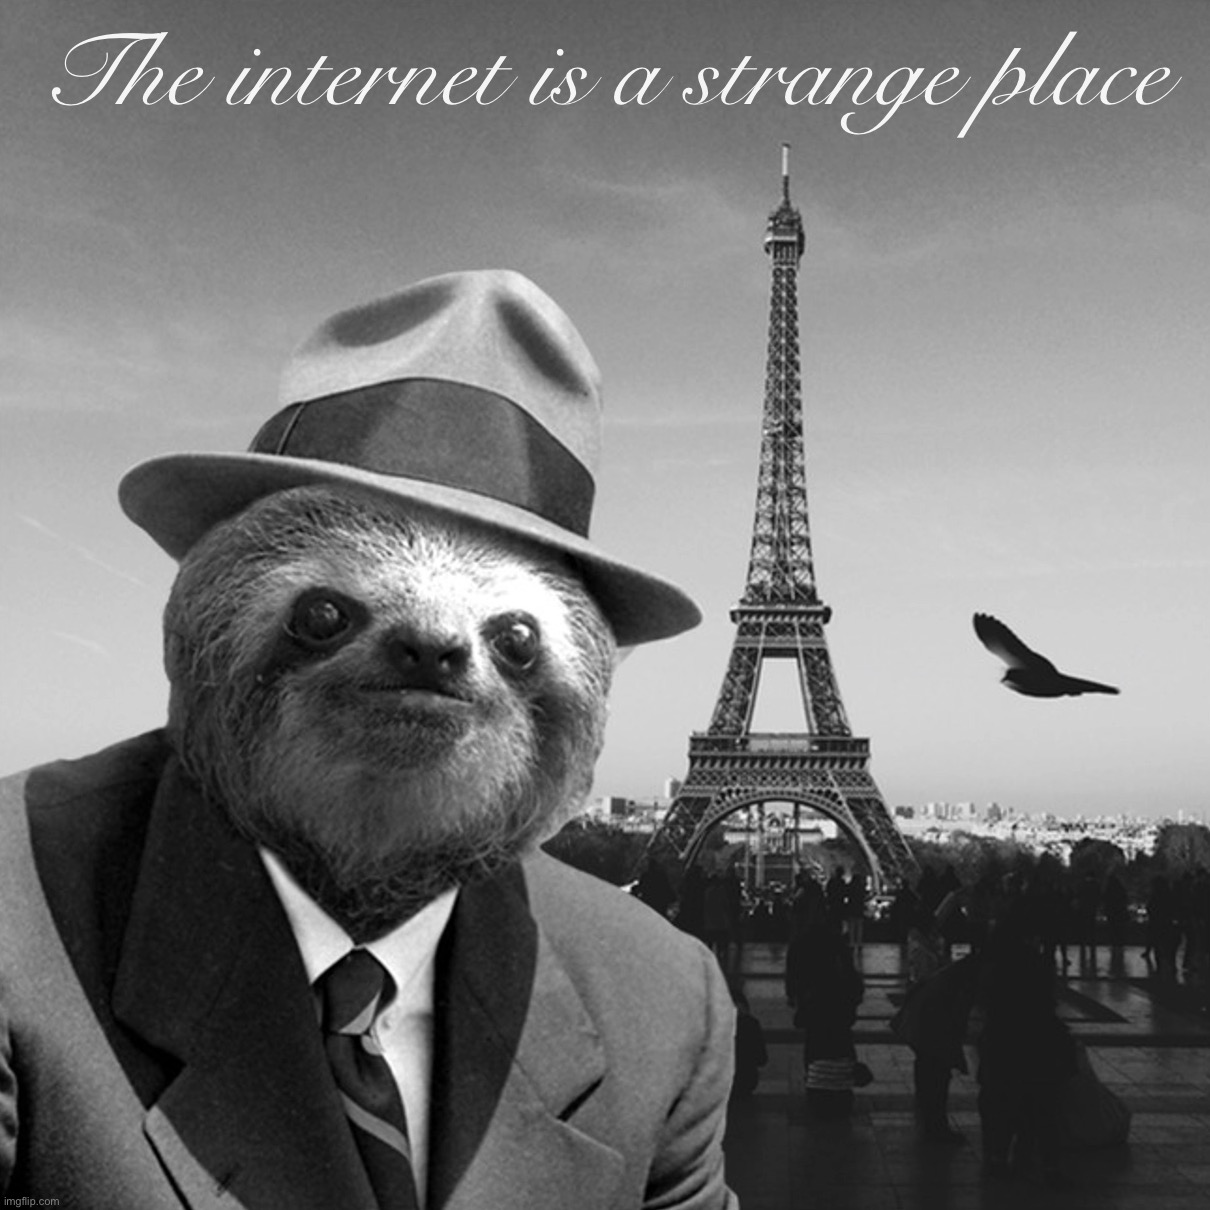 Sloth gentleman | The internet is a strange place | image tagged in sloth gentleman | made w/ Imgflip meme maker